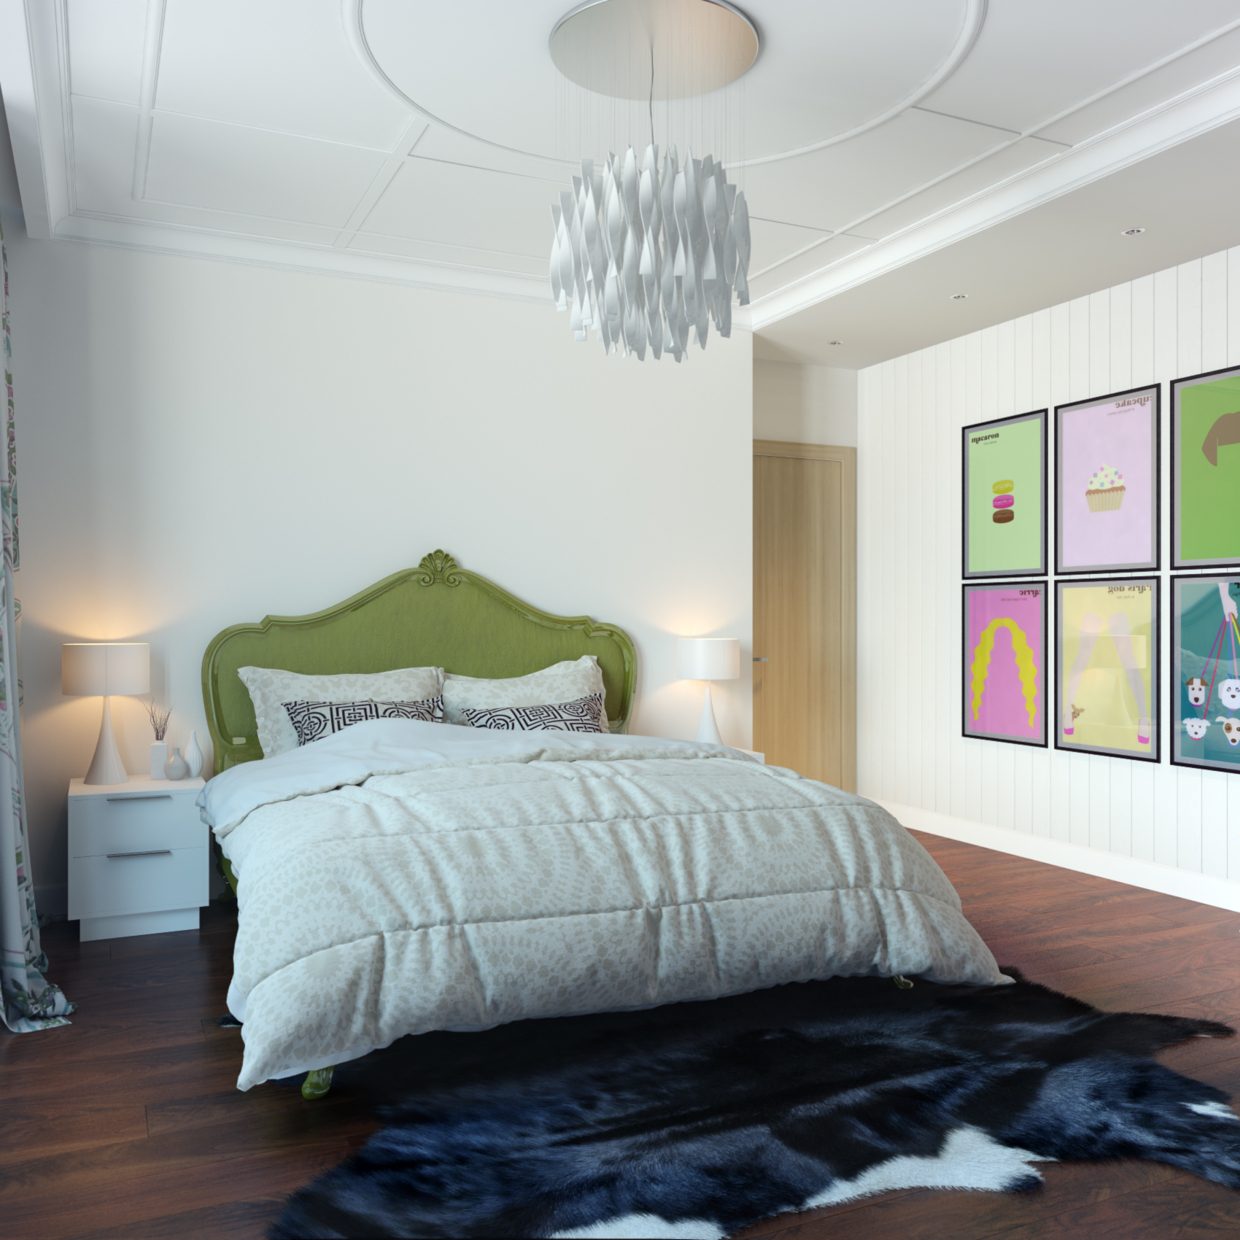 Pop Art bedroom wall decoration "width =" 1240 "height =" 1240 "srcset =" https://mileray.com/wp-content/uploads/2020/05/1588509359_552_40-Bedroom-Designs-Include-With-Furniture-Placement-and-Decorating-Ideas.jpg 1240w, https : //mileray.com/wp-content/uploads/2016/03/pop-art-bedroom-wall-13-150x150.jpg 150w, https://mileray.com/wp-content/uploads/2016/03 / pop-art-bedroom-wall-13-300x300.jpg 300w, https://mileray.com/wp-content/uploads/2016/03/pop-art-bedroom-wall-13-768x768.jpg 768w, https: //mileray.com/wp-content/uploads/2016/03/pop-art-bedroom-wall-13-1024x1024.jpg 1024w, https://mileray.com/wp-content/uploads/2016/03/ Pop -Art-bedroom-wall-13-696x696.jpg 696w, https://mileray.com/wp-content/uploads/2016/03/pop-art-bedroom-wall-13-1068x1068.jpg 1068w, https: / /mileray.com/wp-content/uploads/2016/03/pop-art-bedroom-wall-13-420x420.jpg 420w "Sizes =" (maximum width: 1240px) 100vw, 1240px